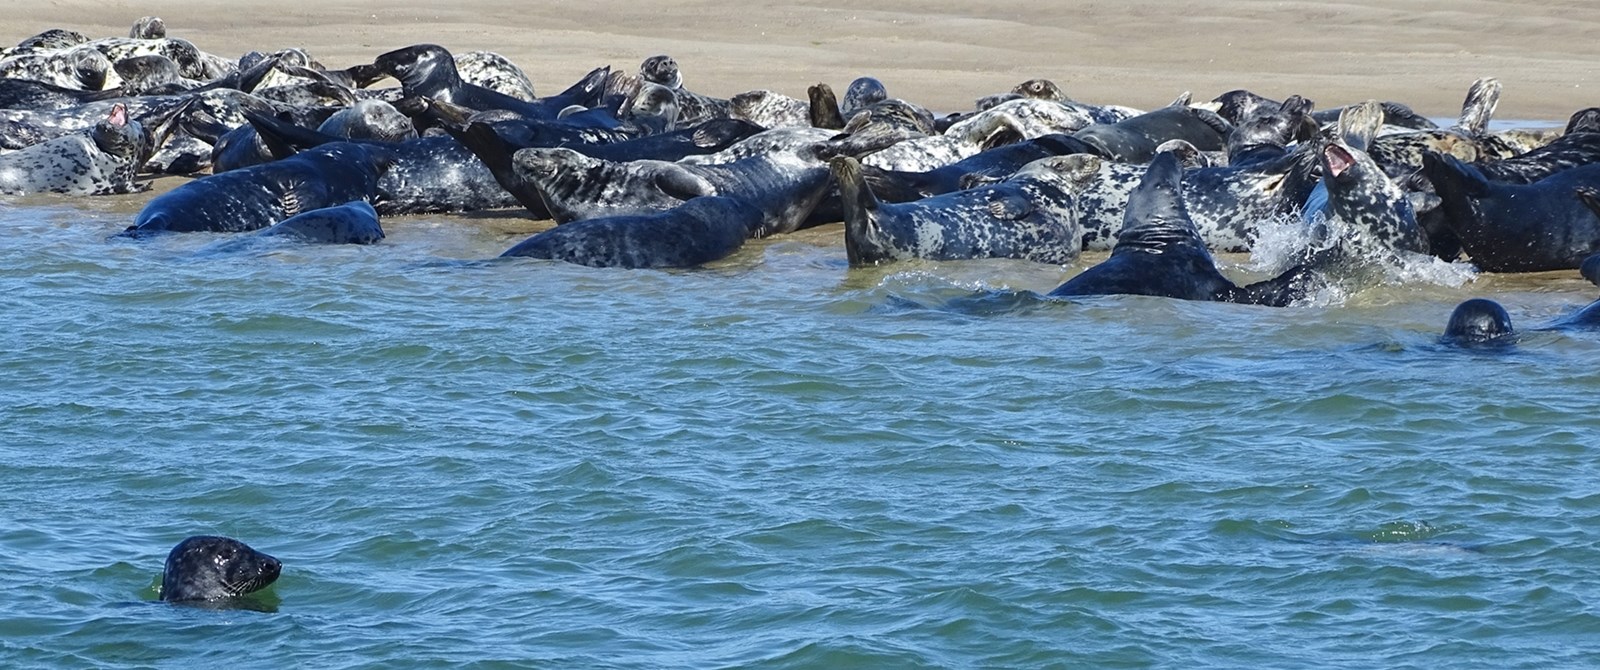 The best way to watch harbor and gray seals up close on Cape Cod is on a seal tour on one of the many boat tours leaving from Chatham and Orleans.